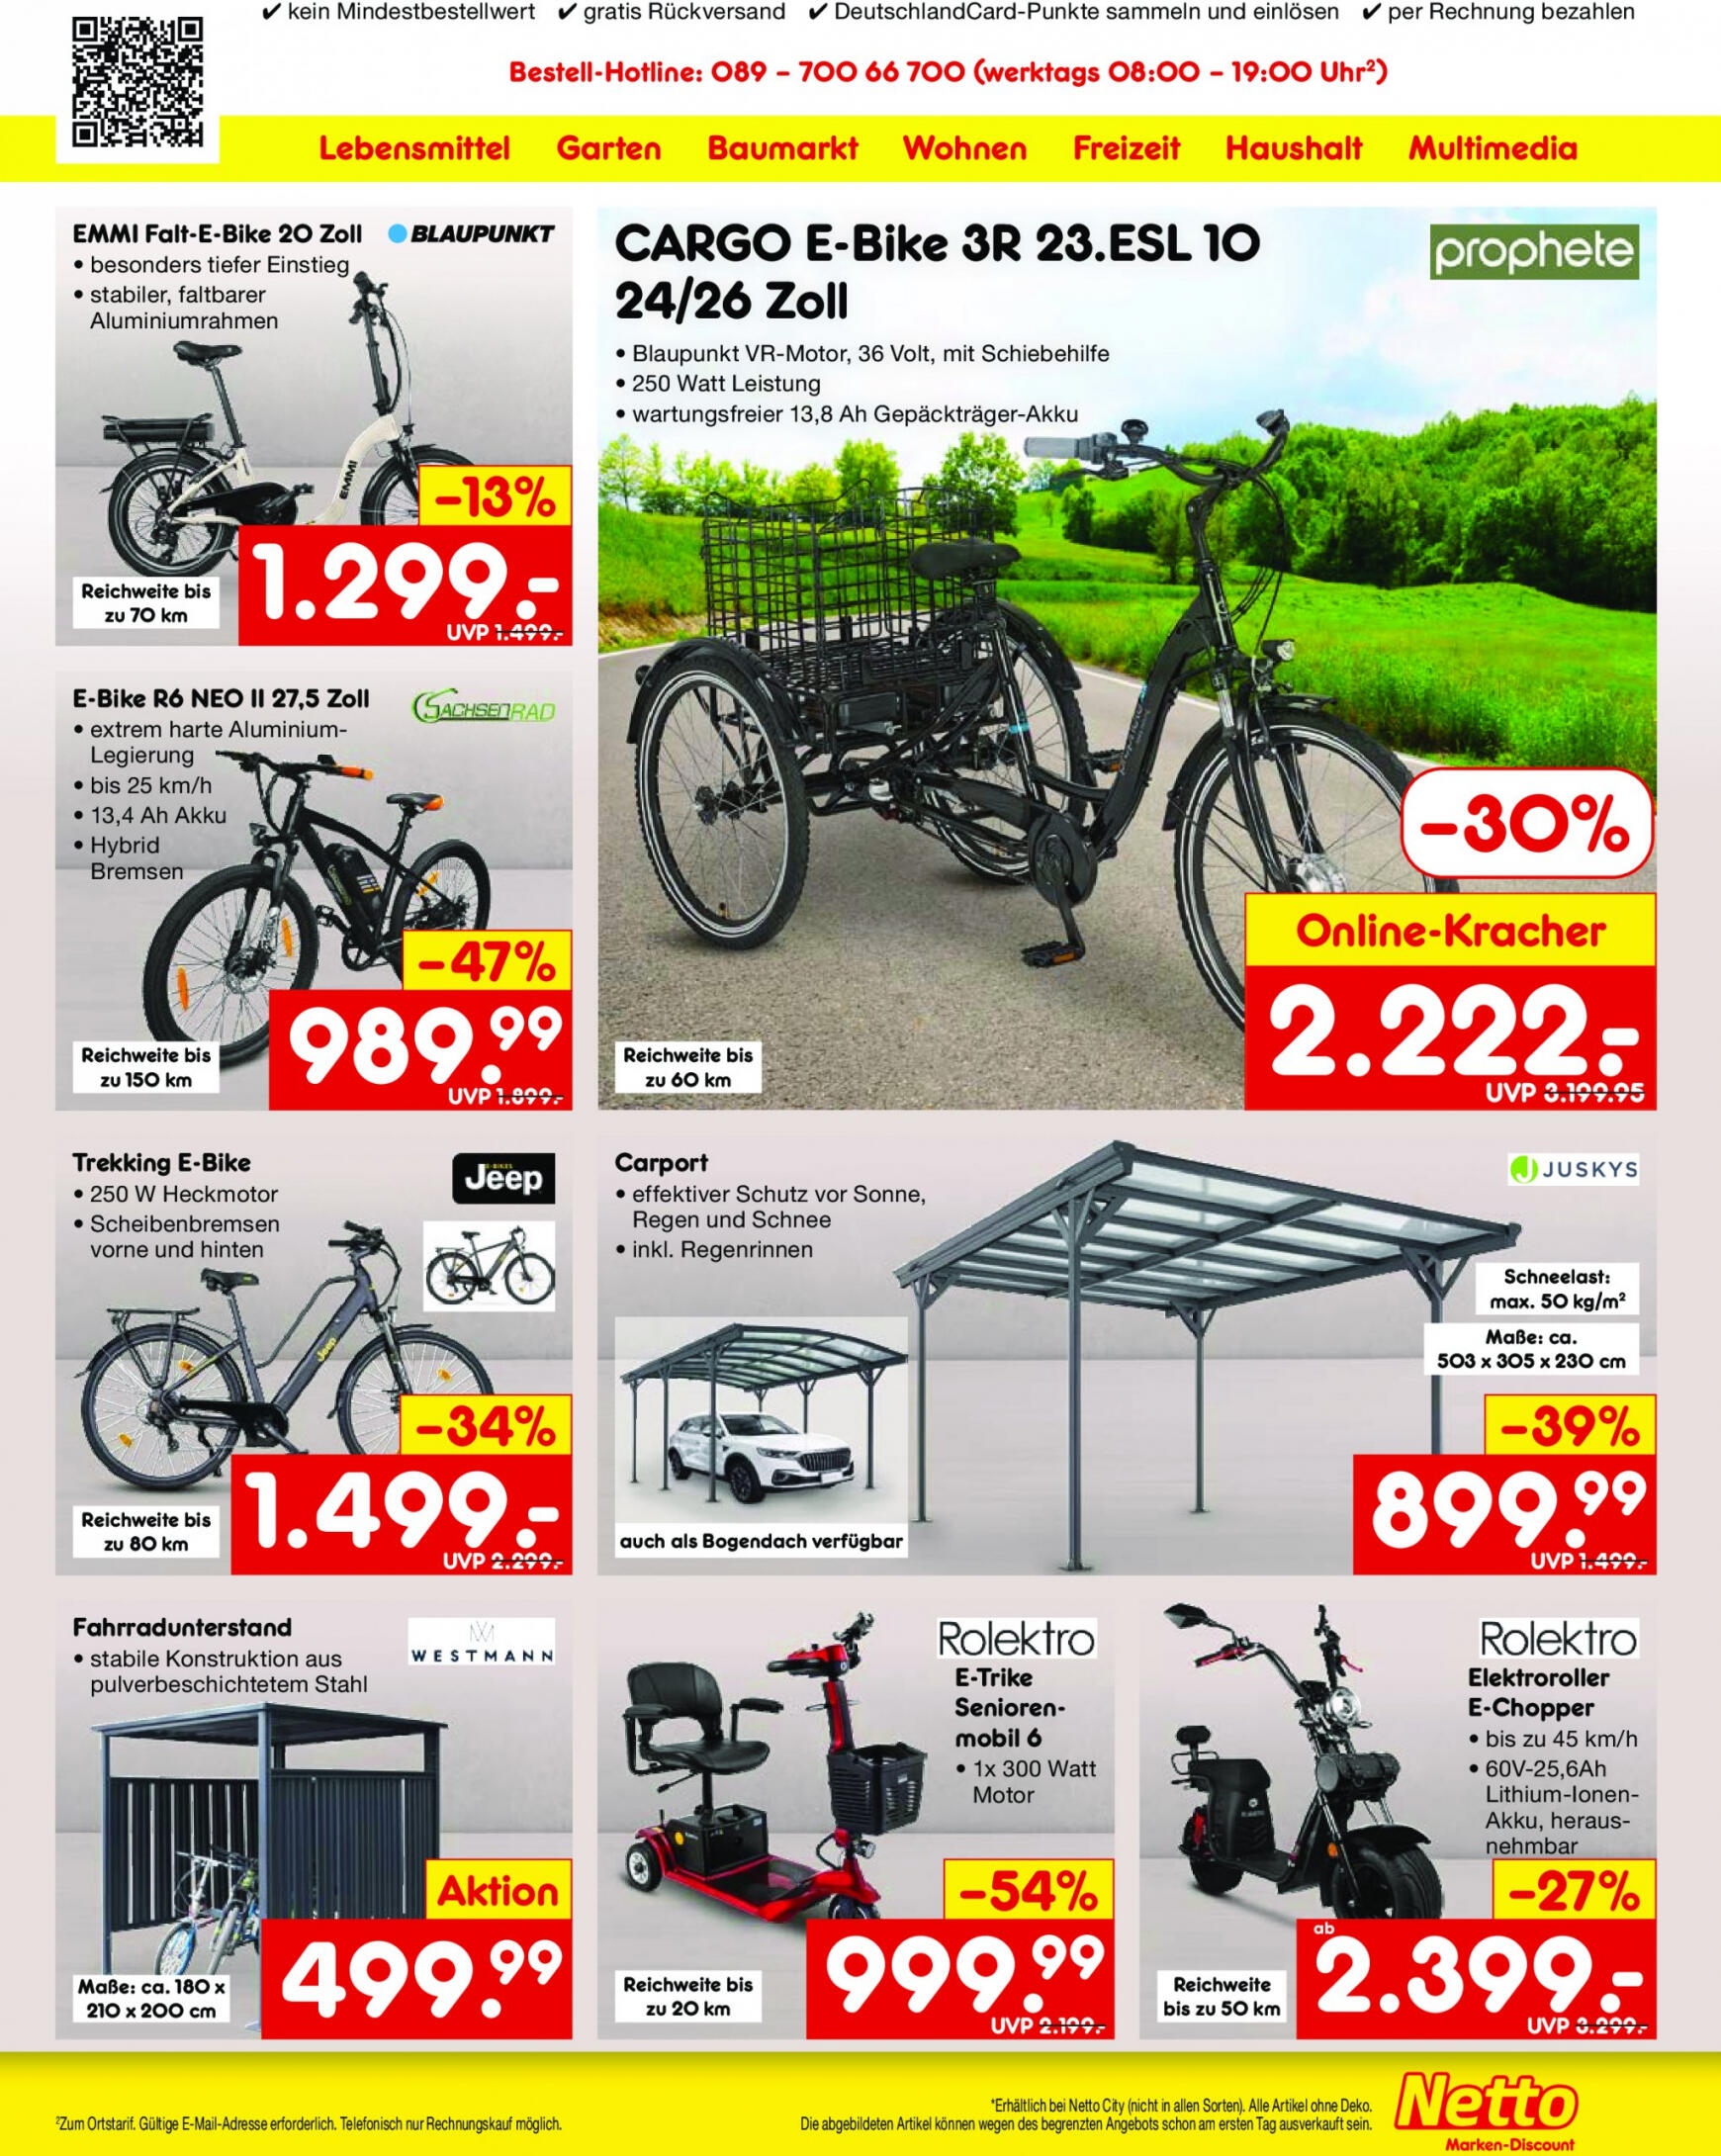 netto - Flyer Netto aktuell 22.04. - 27.04. - page: 37